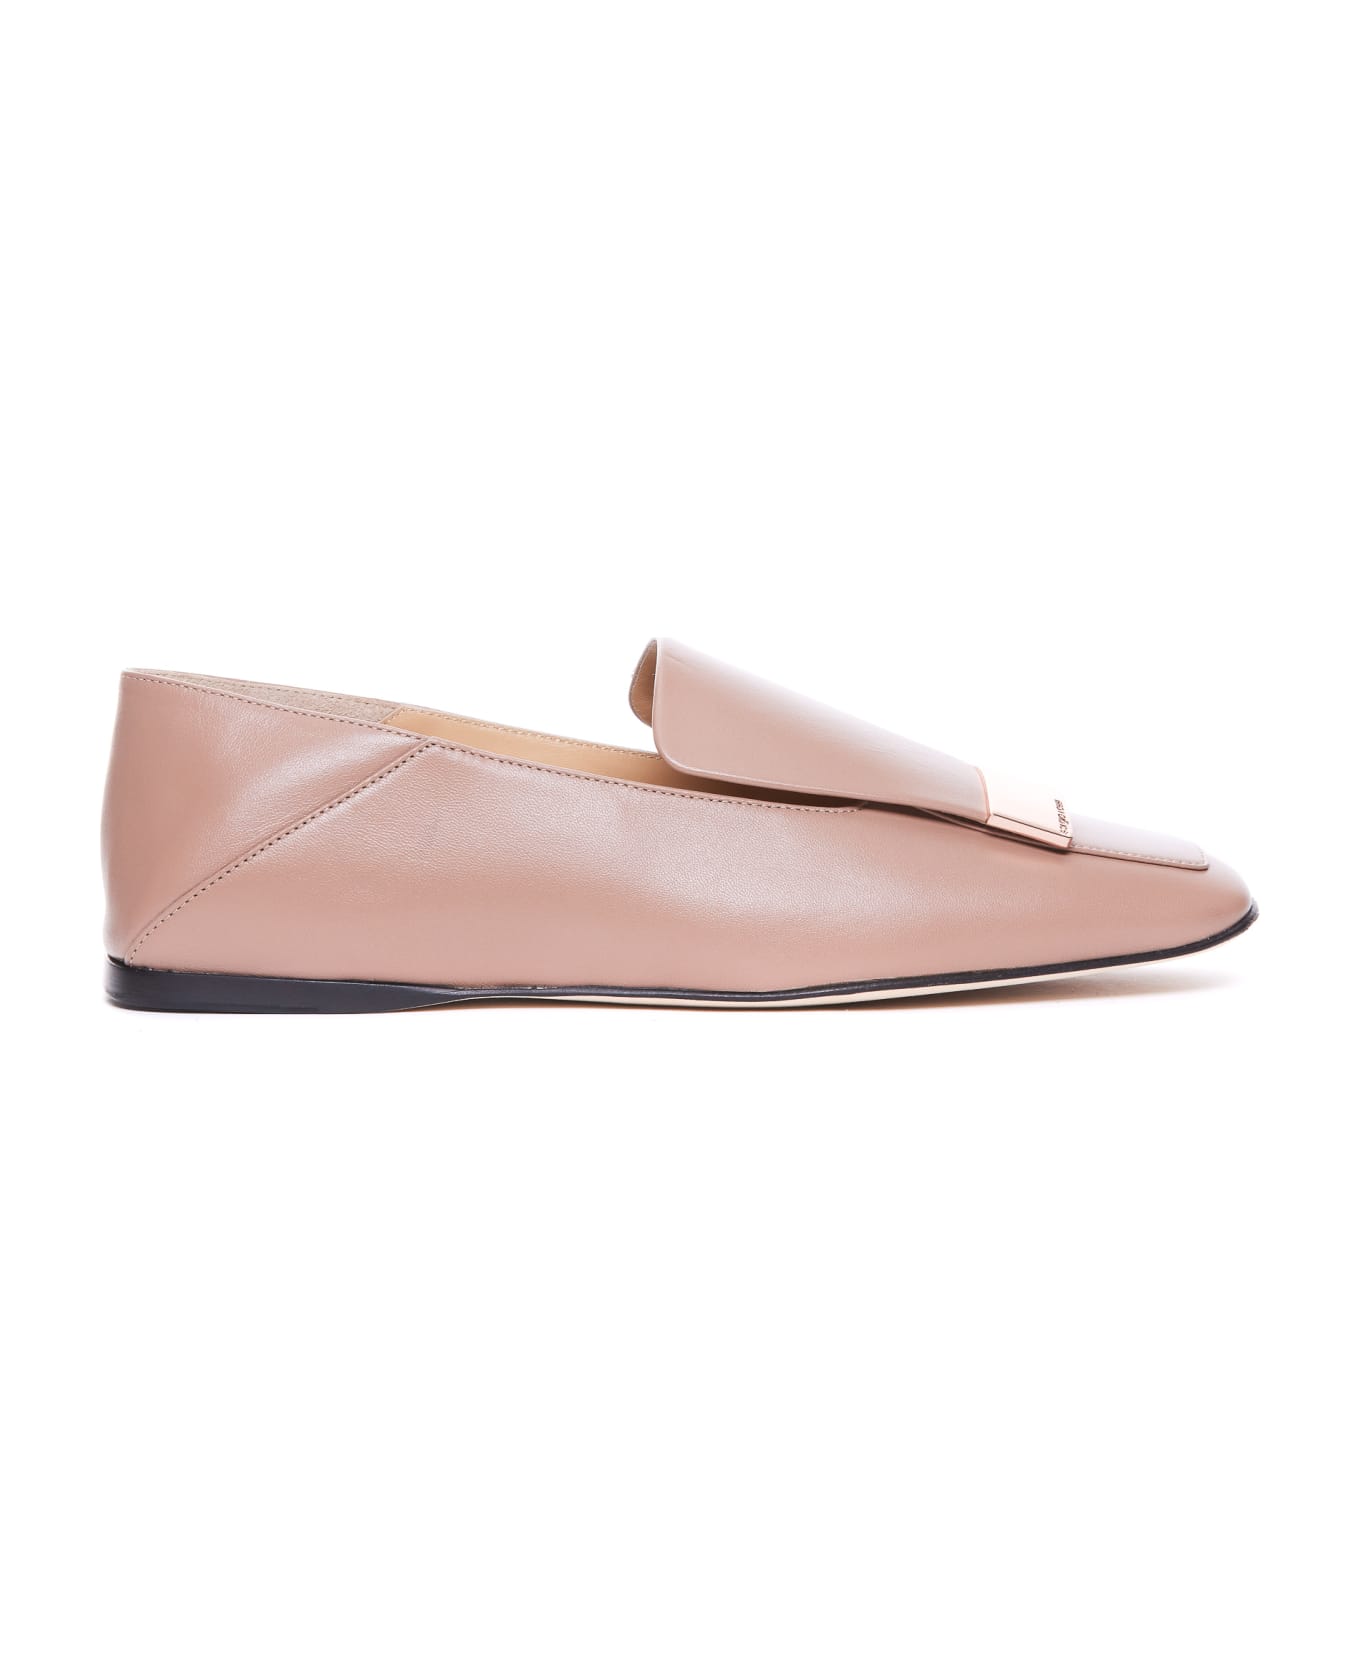 Sergio Rossi Sr1 Loafers - Pink